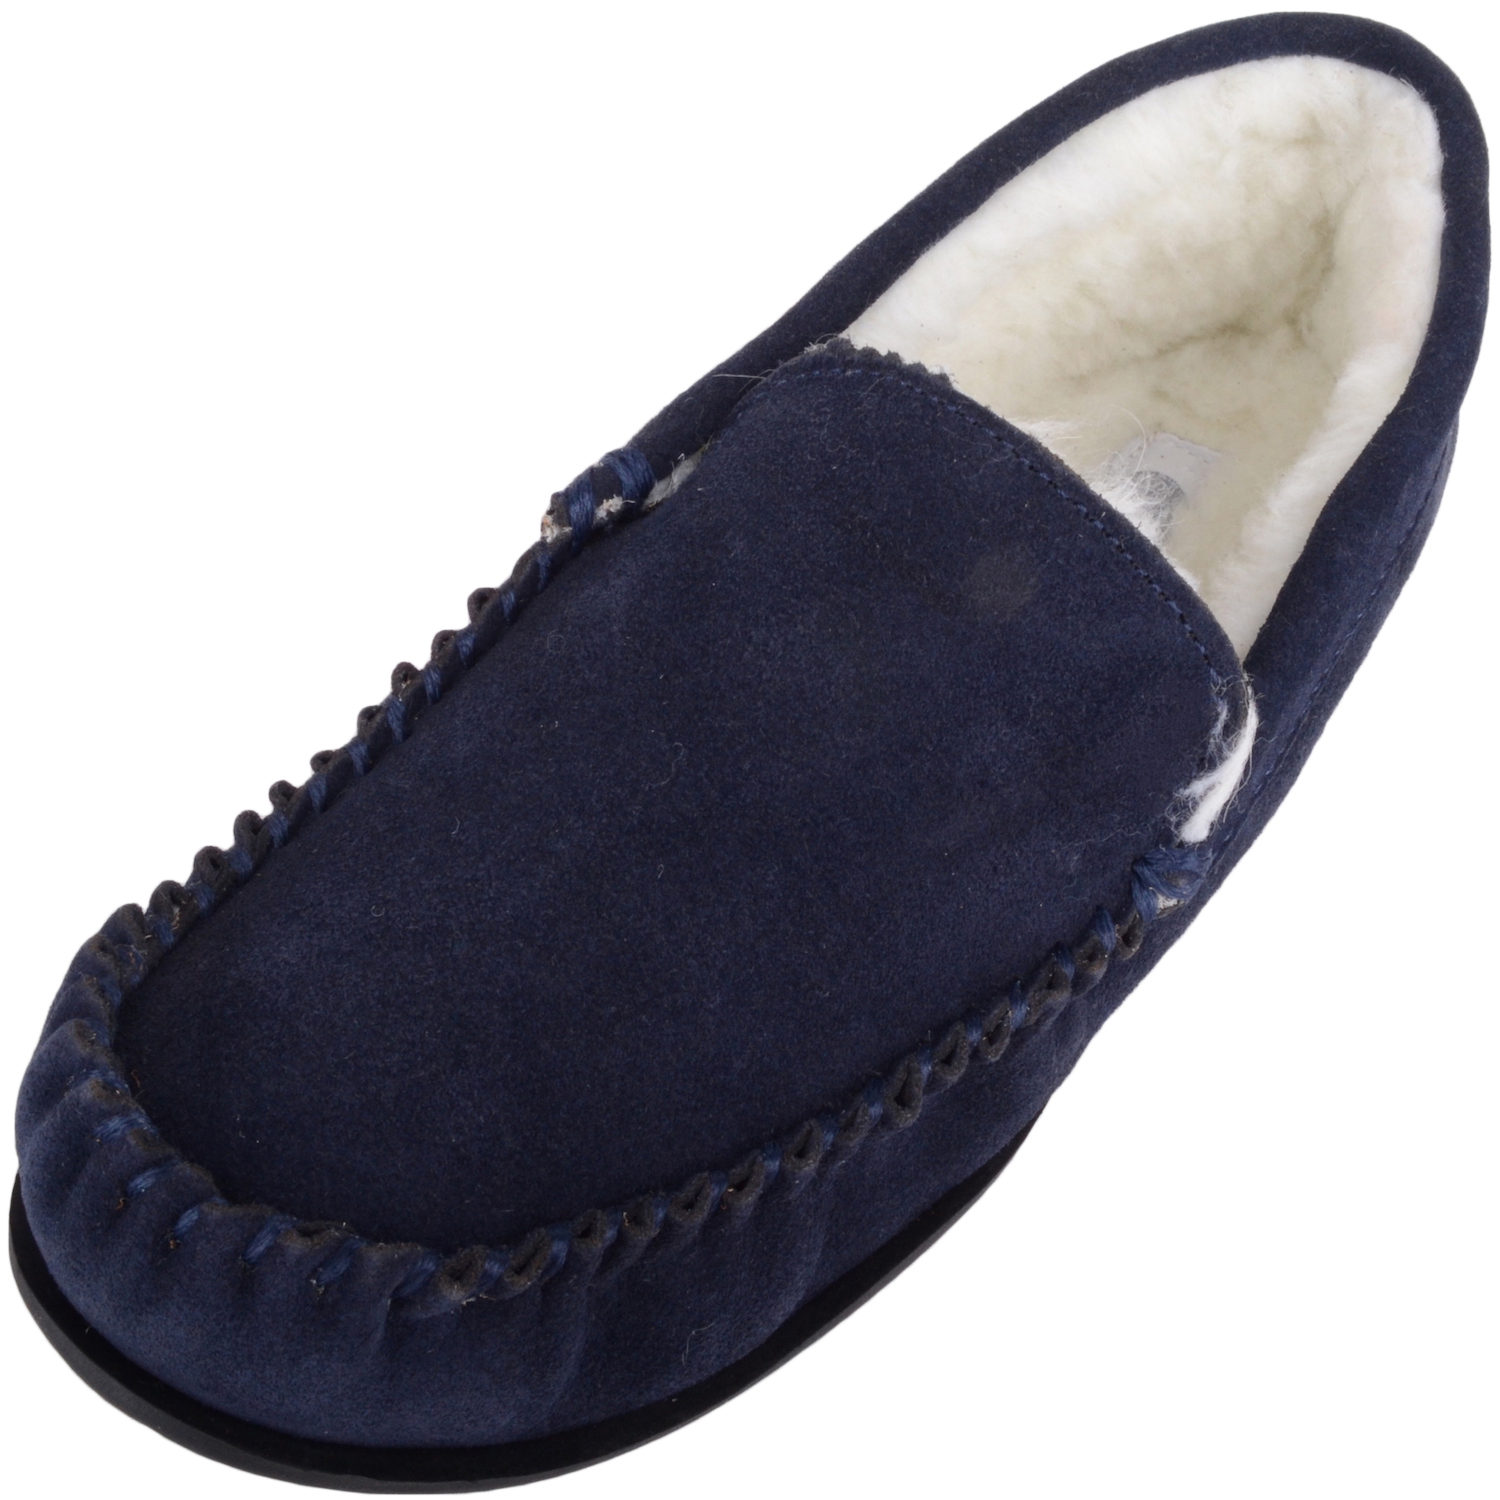 men's loafers and moccasins